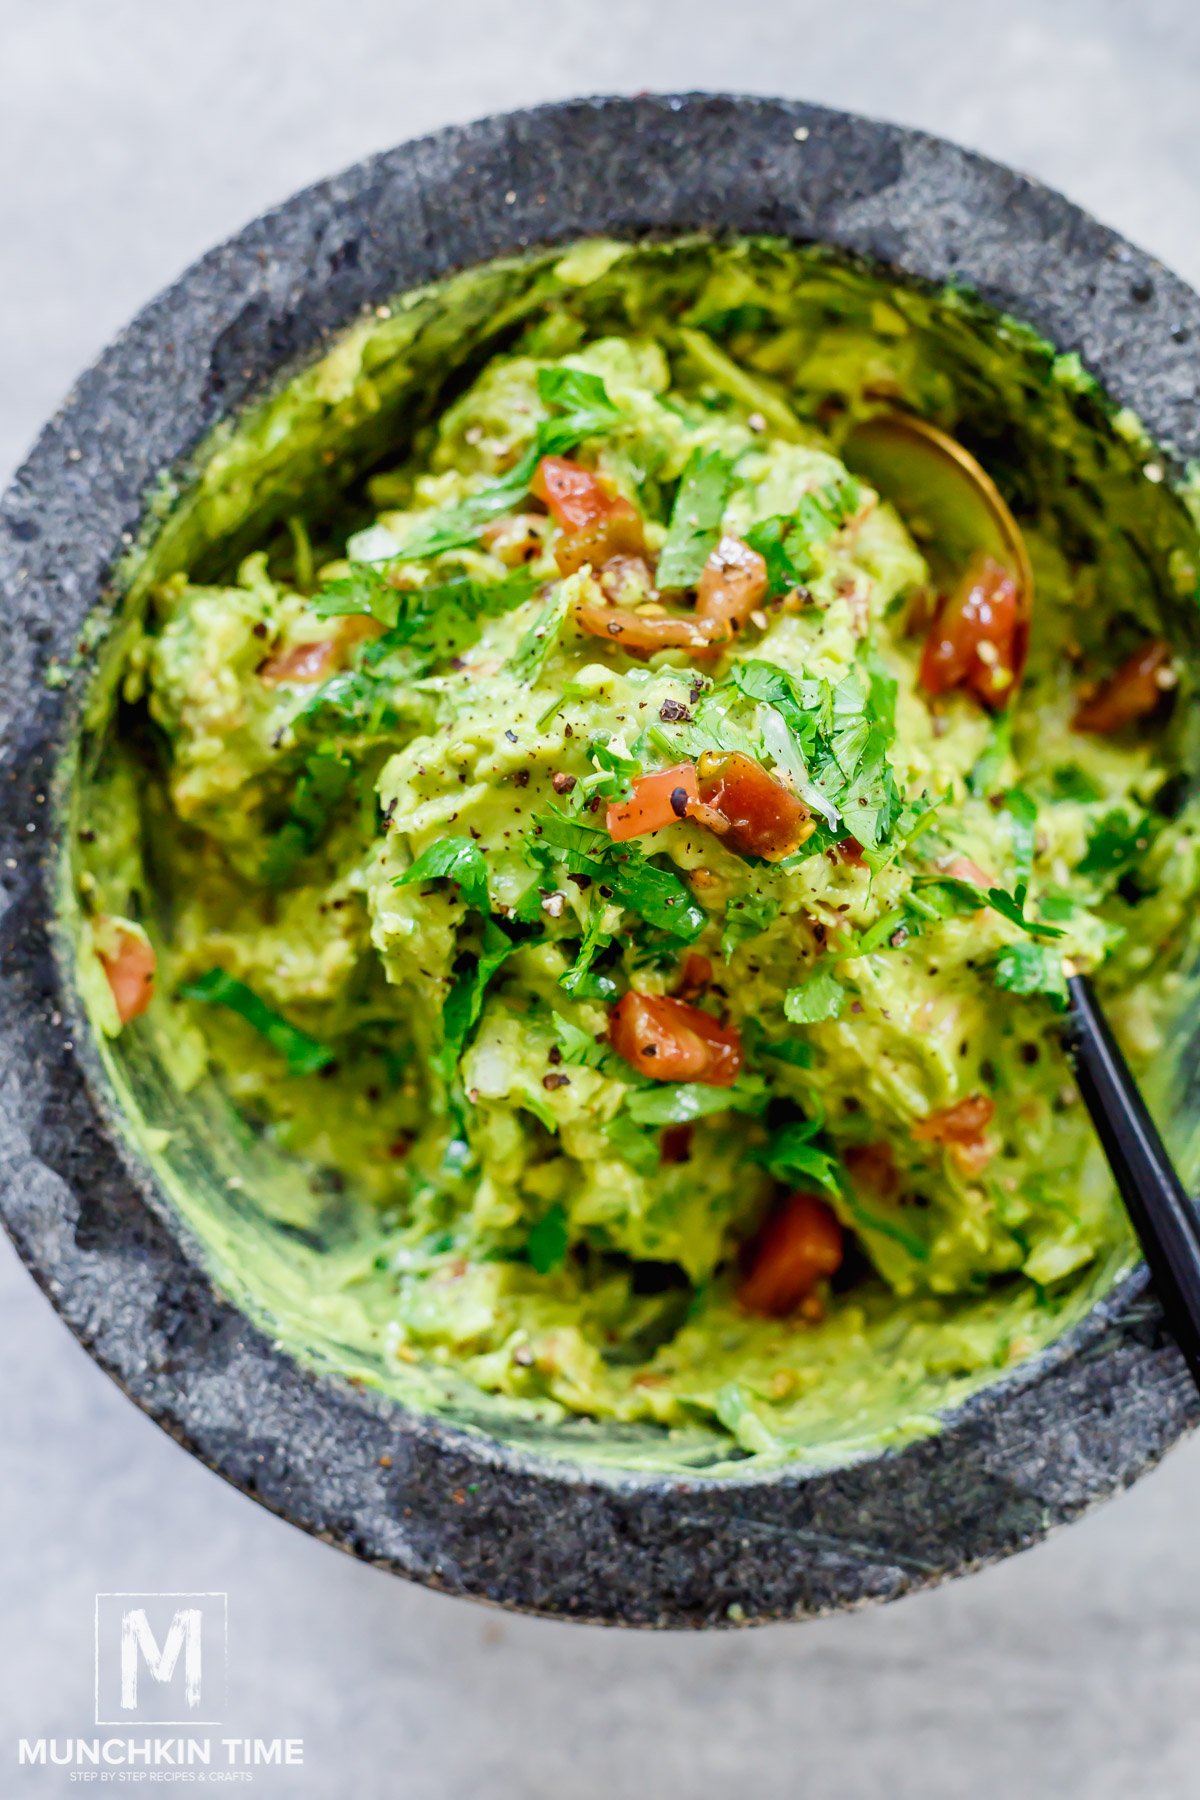 Simple Guacamole with Jalapeno.